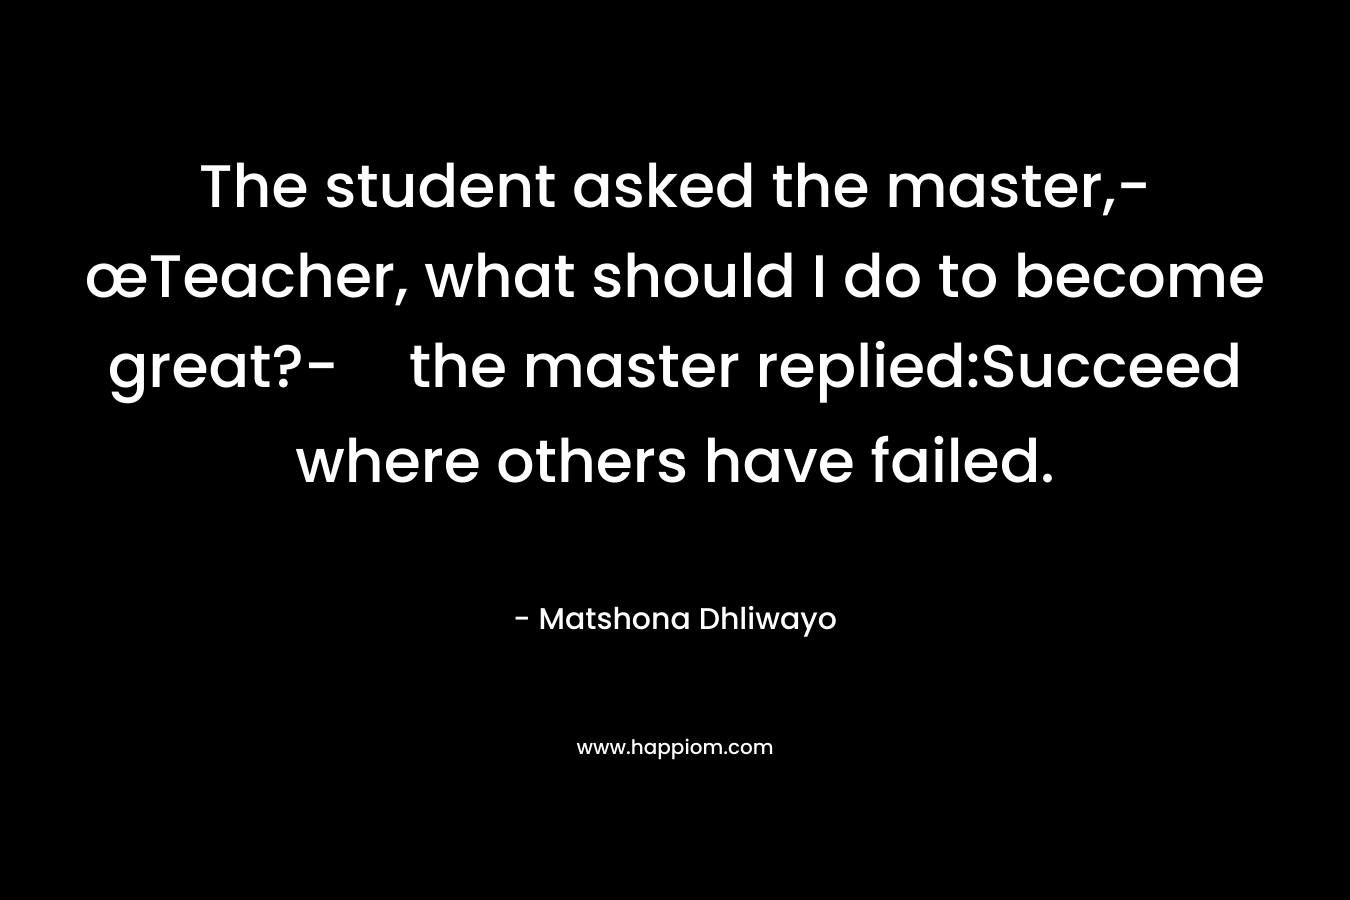 The student asked the master,-œTeacher, what should I do to become great?-the master replied:Succeed where others have failed.